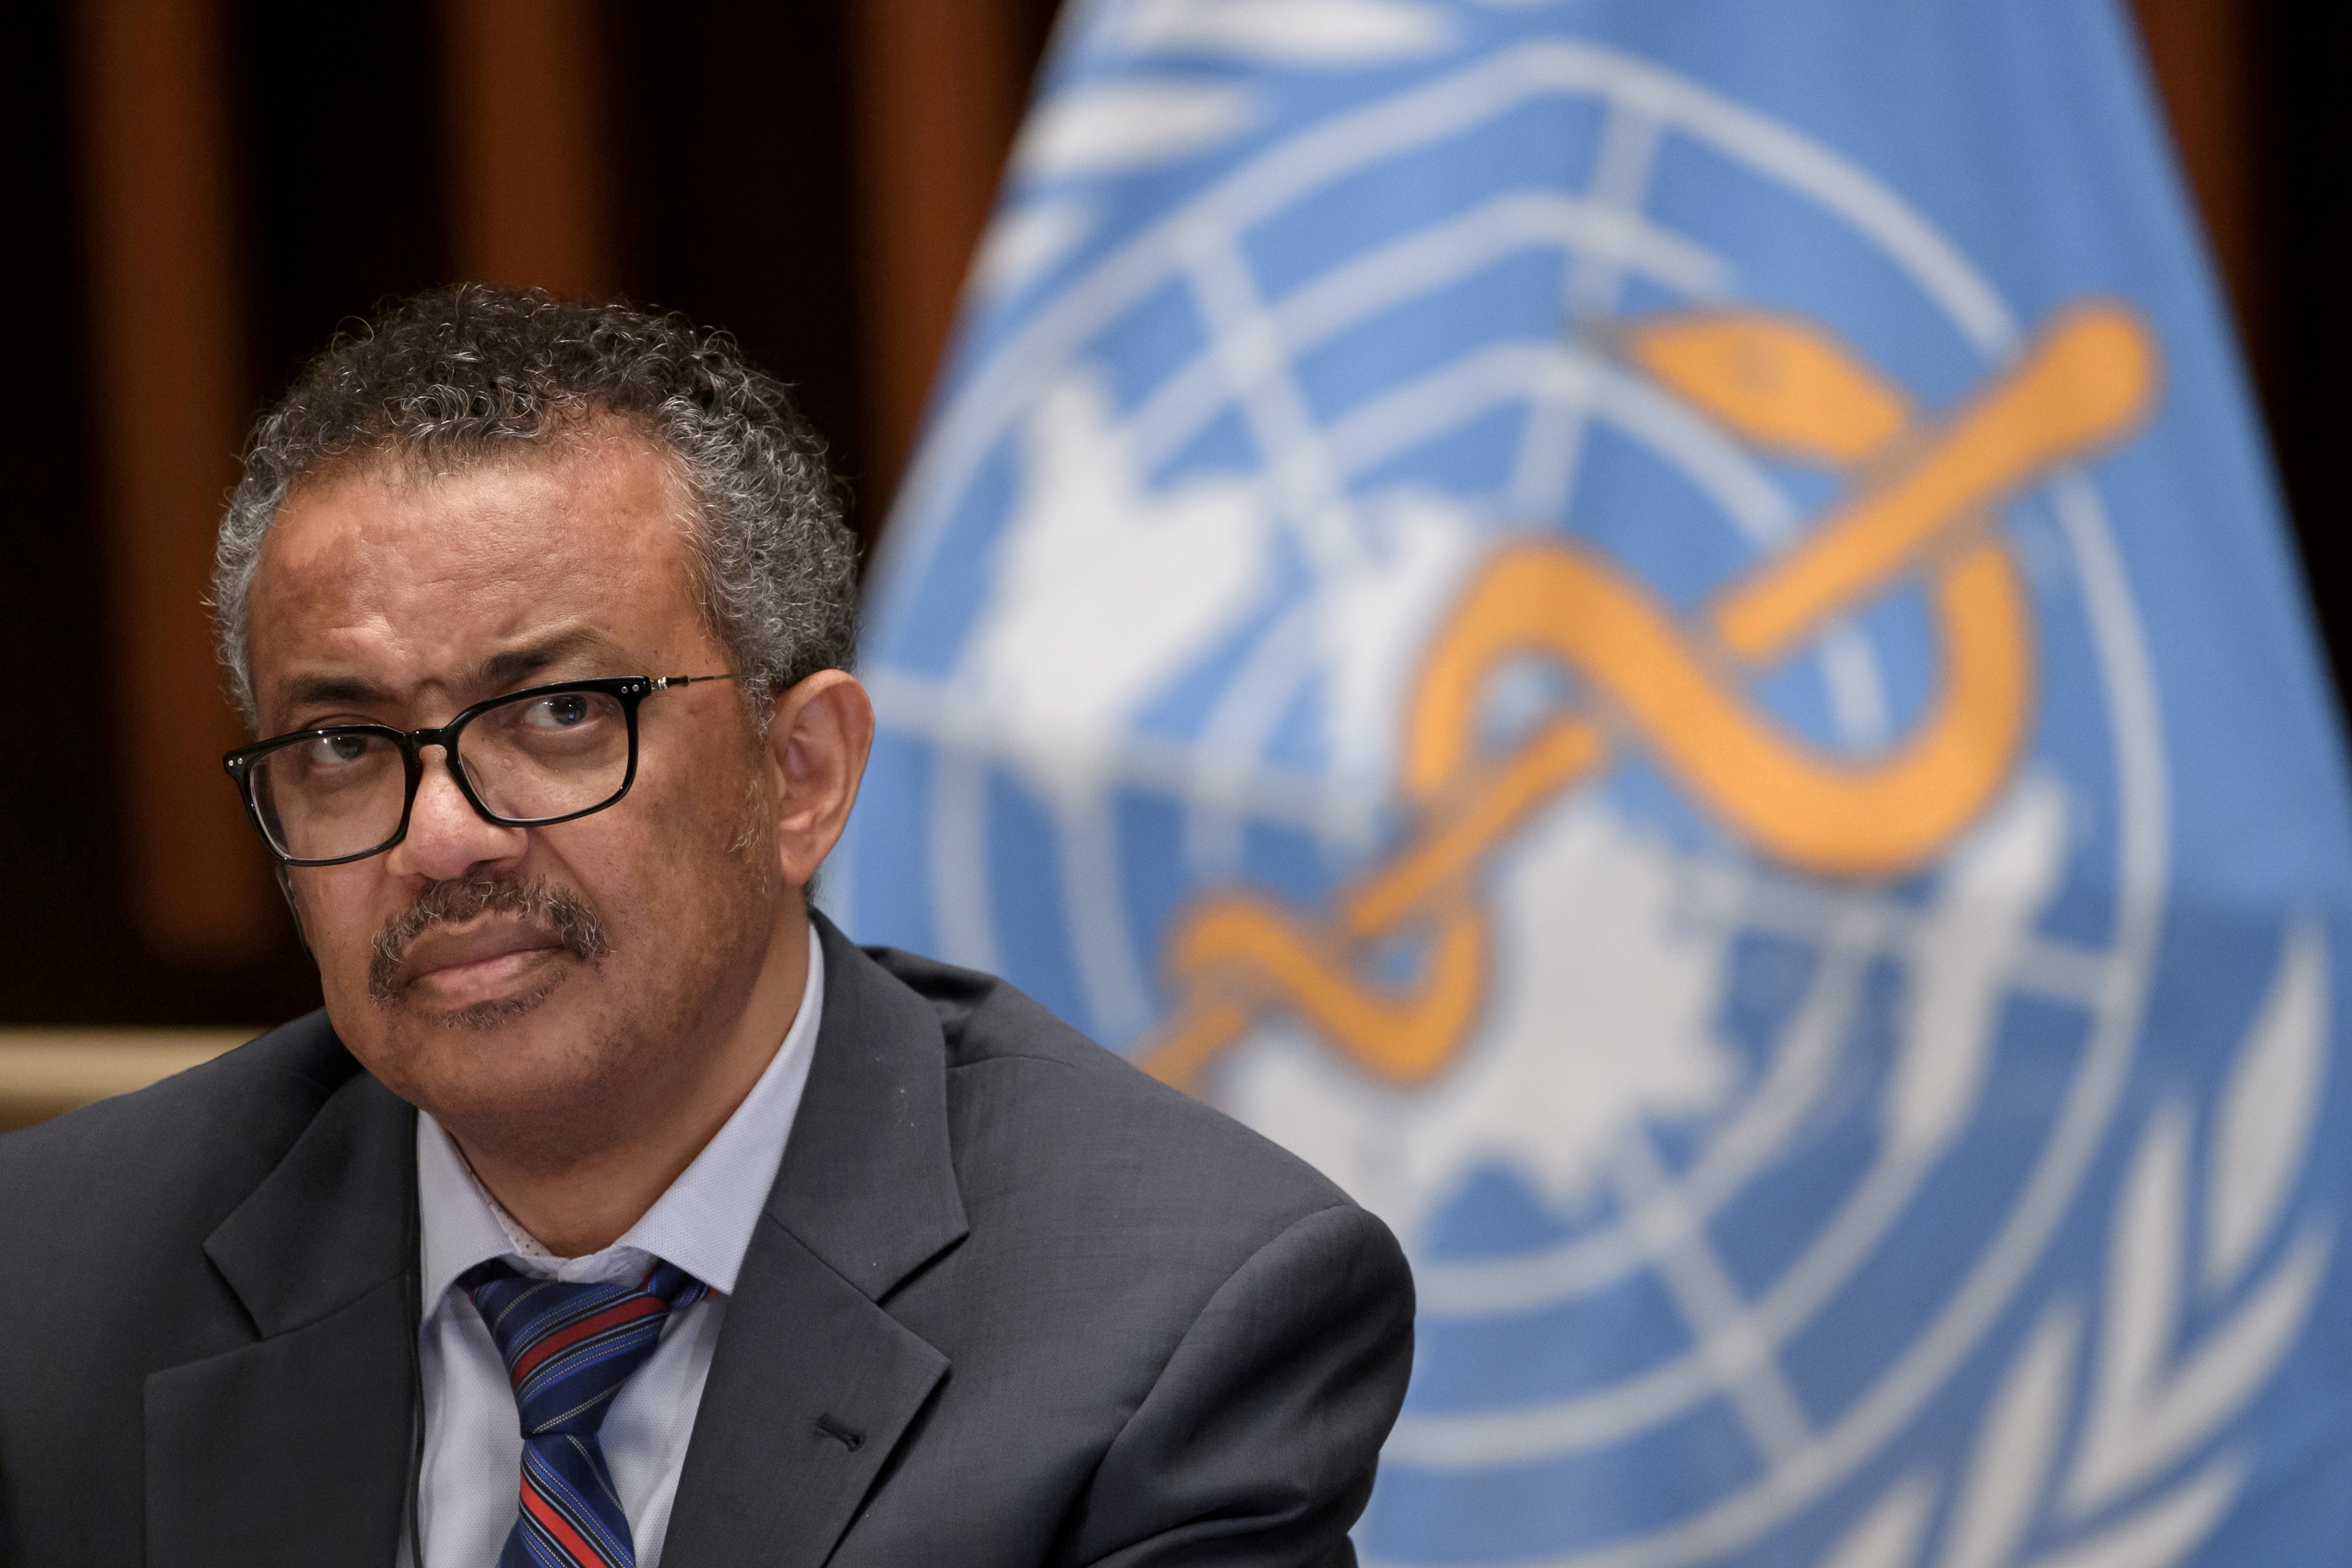 World Health Organization (WHO) Director-General Tedros Adhanom Ghebreyesus attends a news conference organized by Geneva Association of United Nations Correspondents (ACANU) amid the COVID-19 outbreak, caused by the novel coronavirus, at the WHO headquarters in Geneva Switzerland July 3, 2020. Fabrice Coffrini/Pool via REUTERS